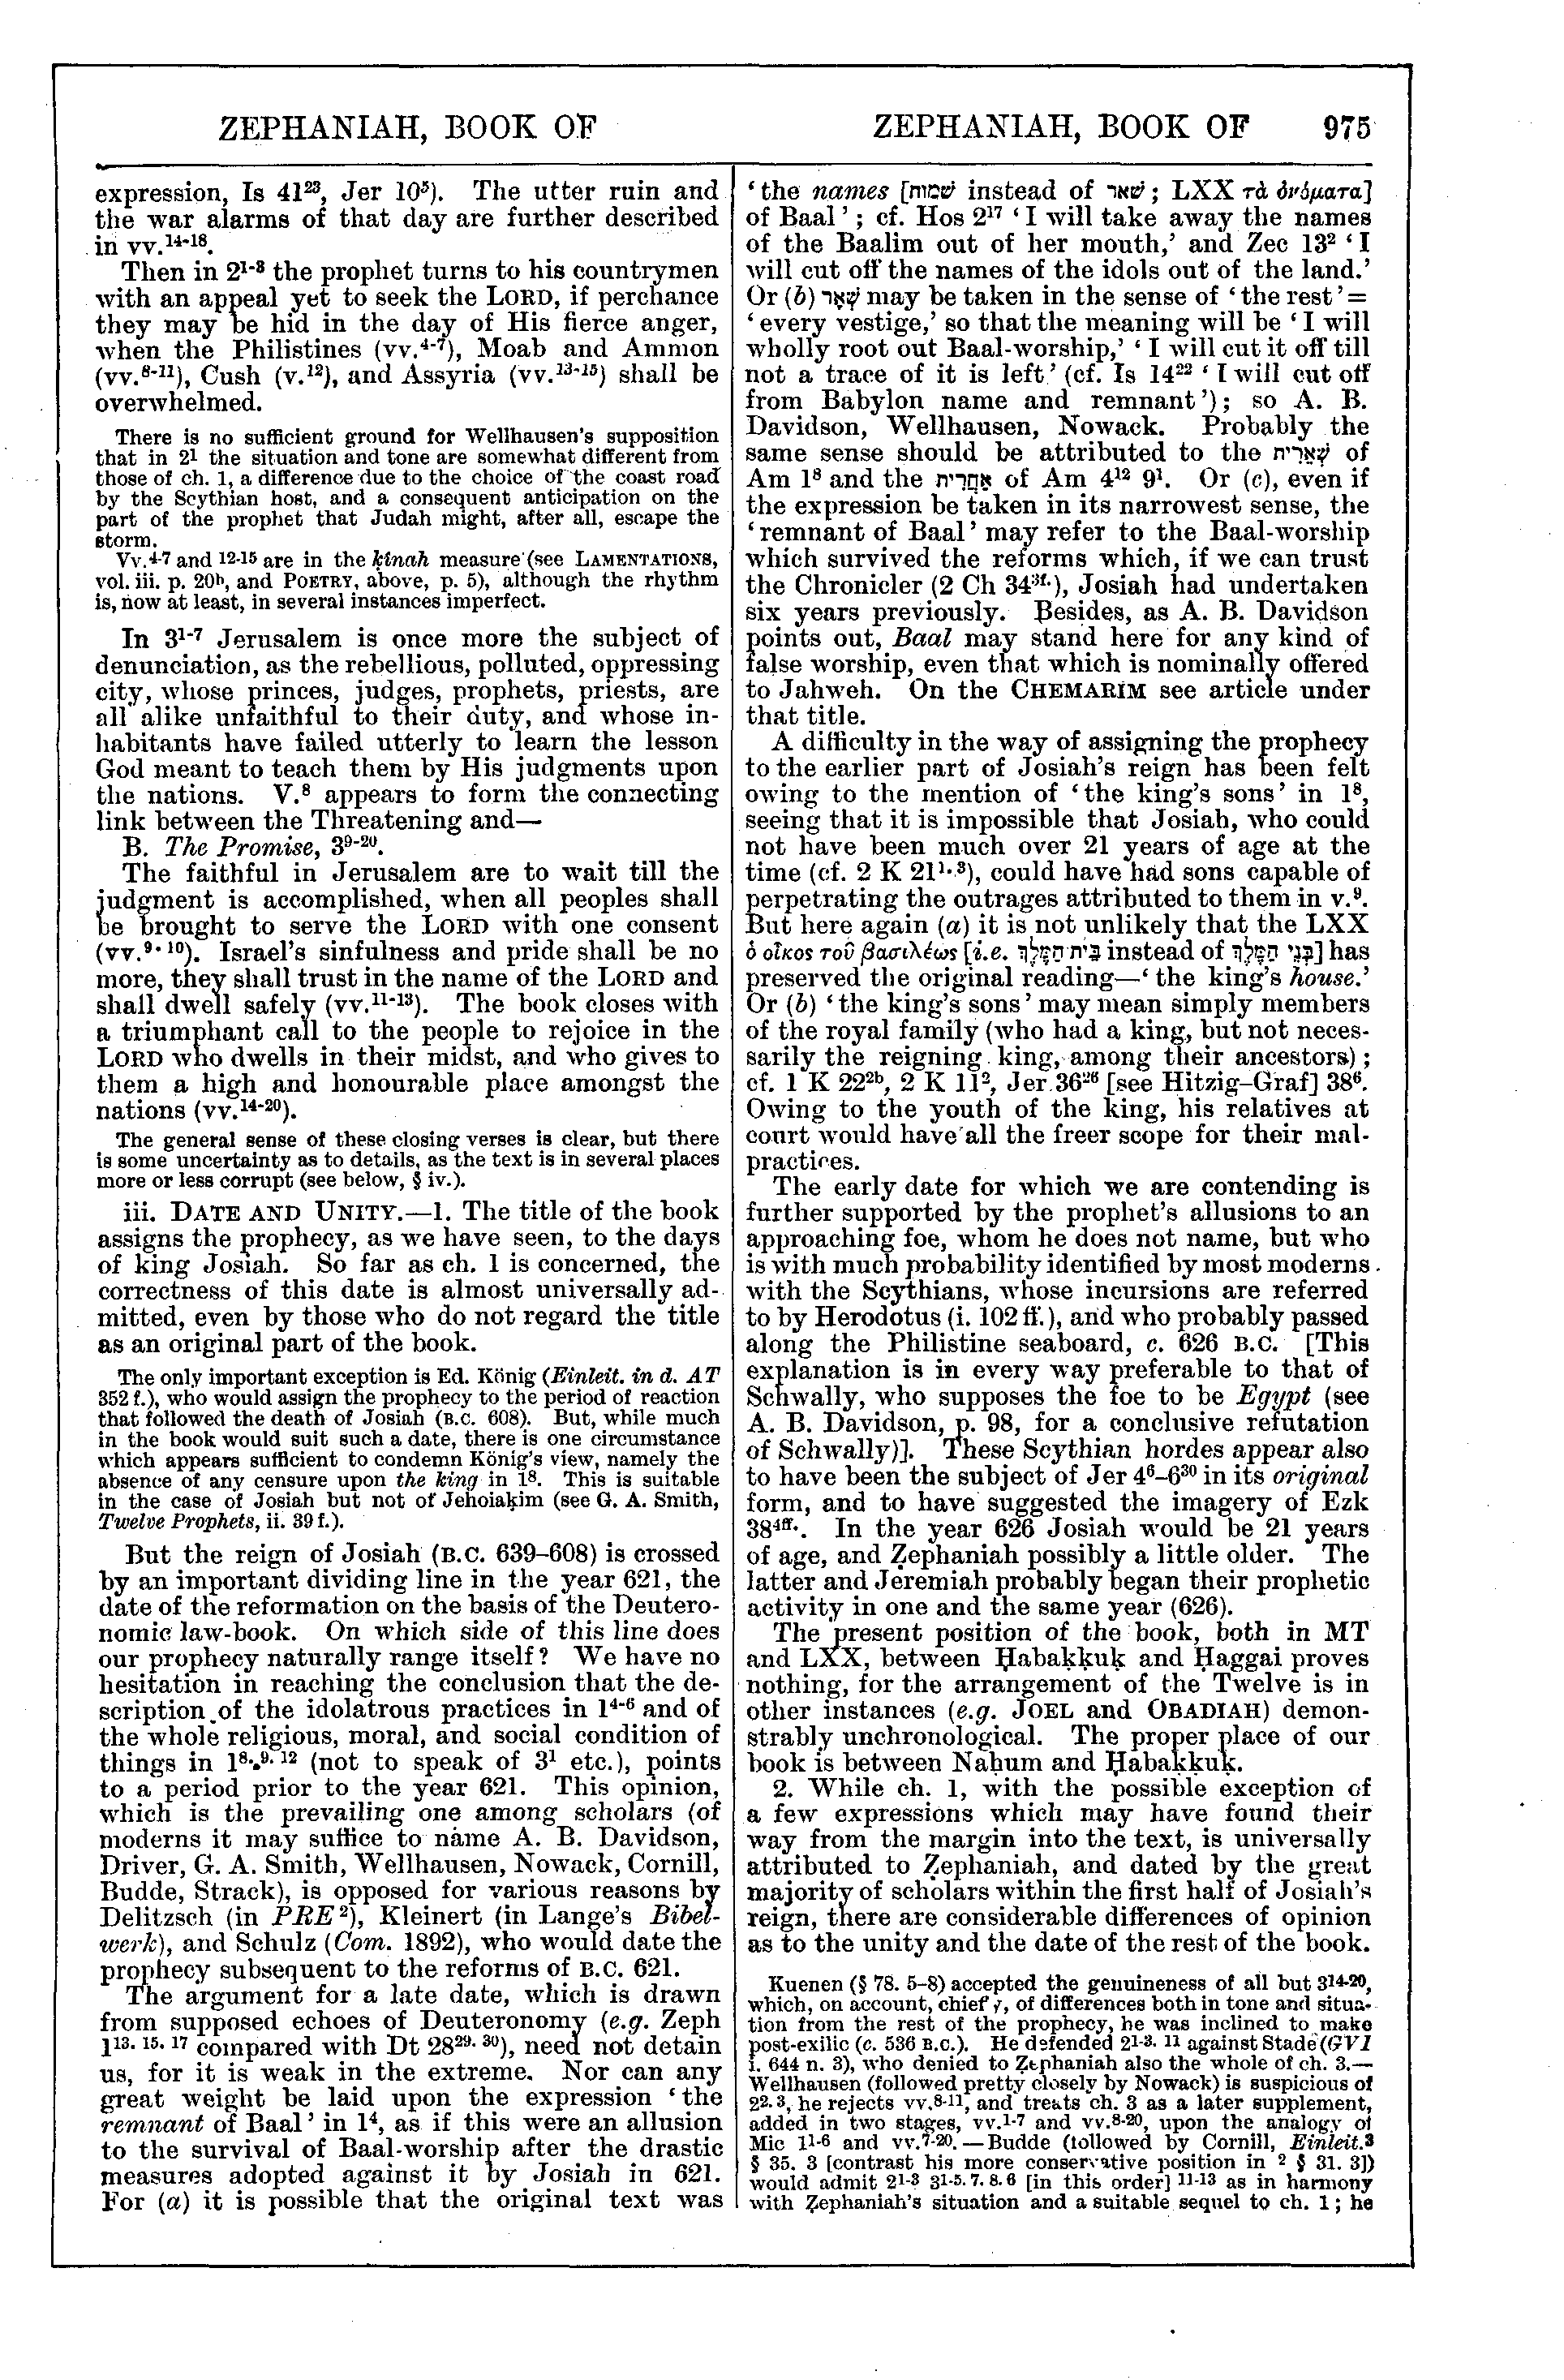 Image of page 975